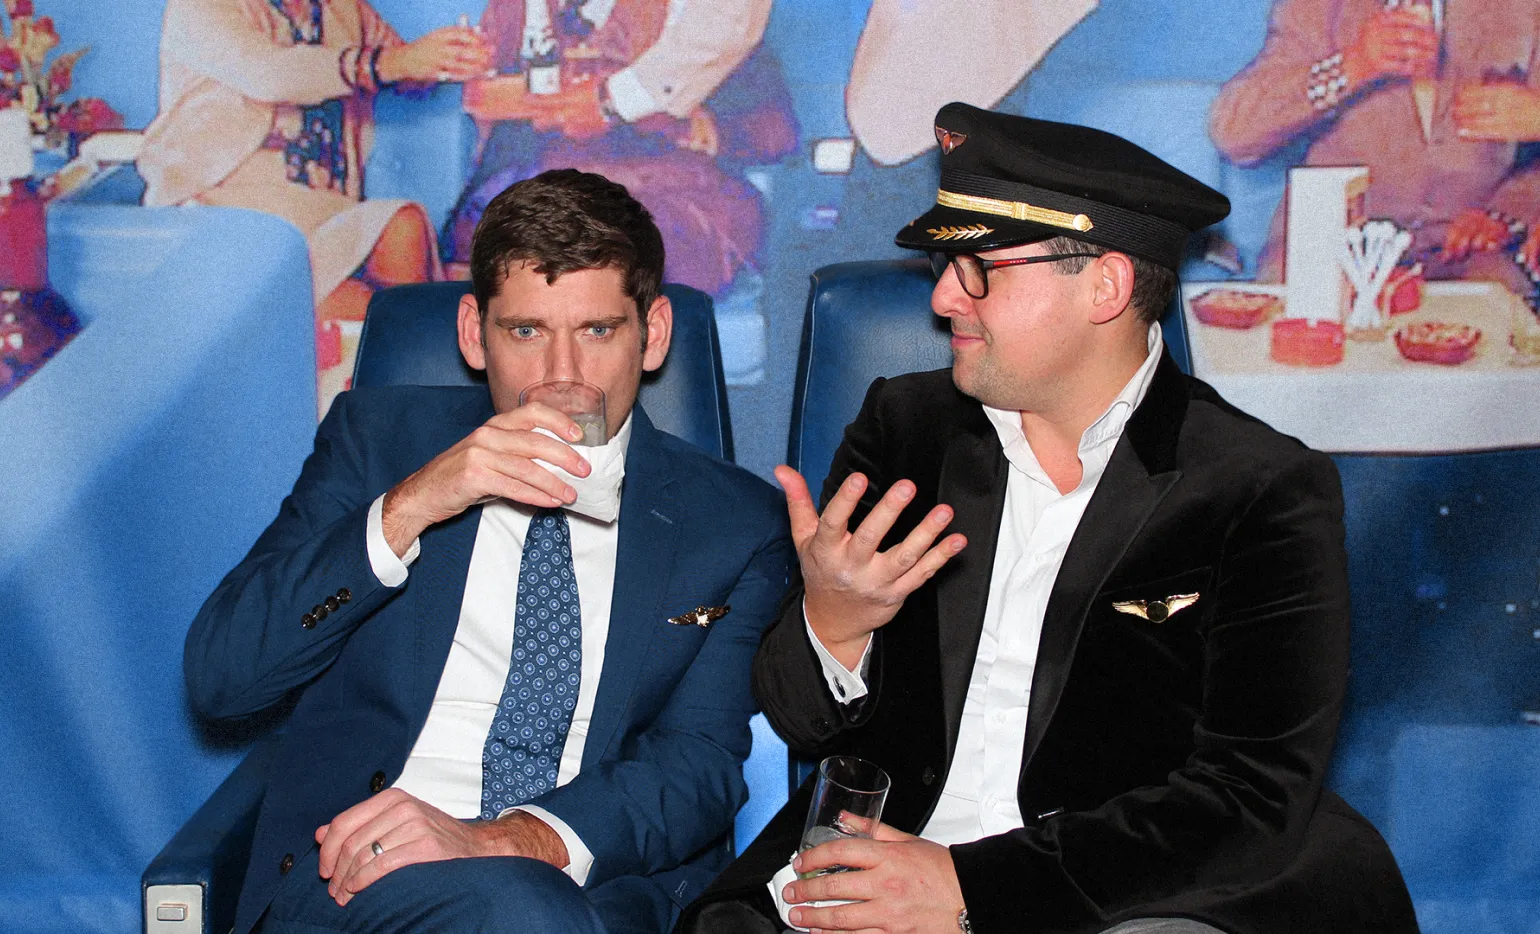 Two men are sitting side by side. The man on the left is wearing a blue suit and tie, holding a drink. The man on the right is dressed in a pilot's uniform, also holding a drink, and appears to be talking. There's a colorful background behind them with people and tables.